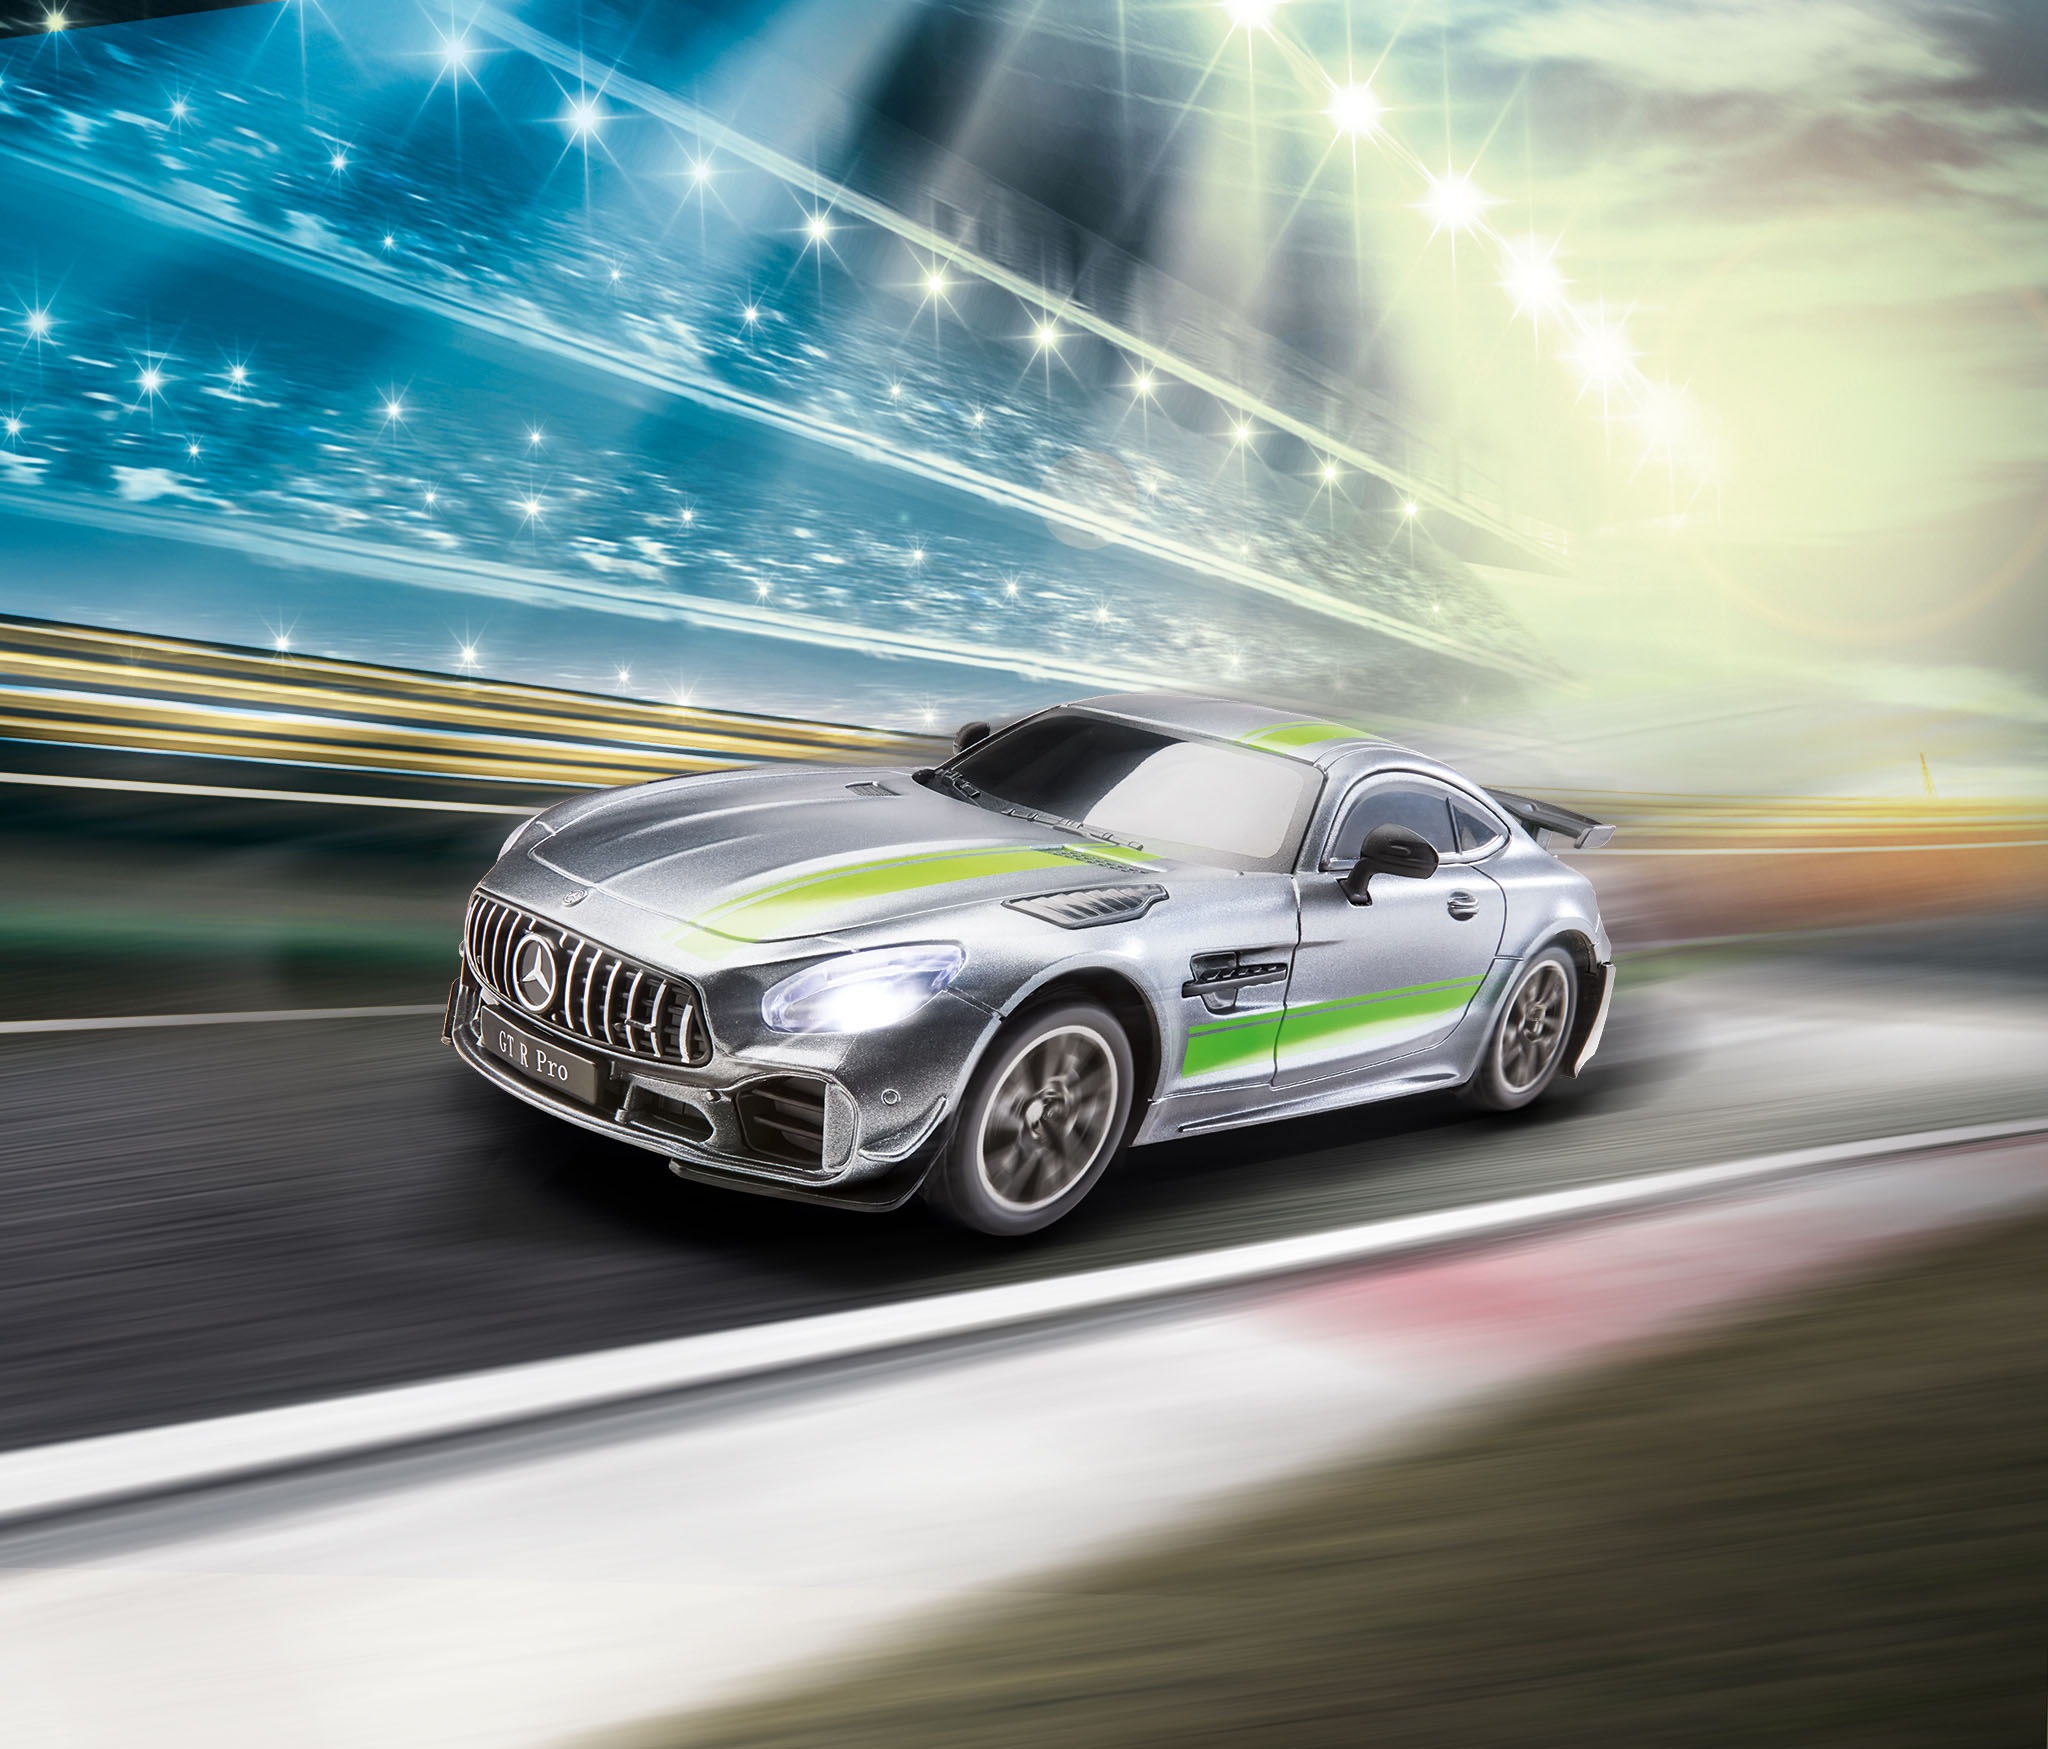 Revell® RC-Auto »Revell® control, RC Mercedes-AMG GT R Pro«